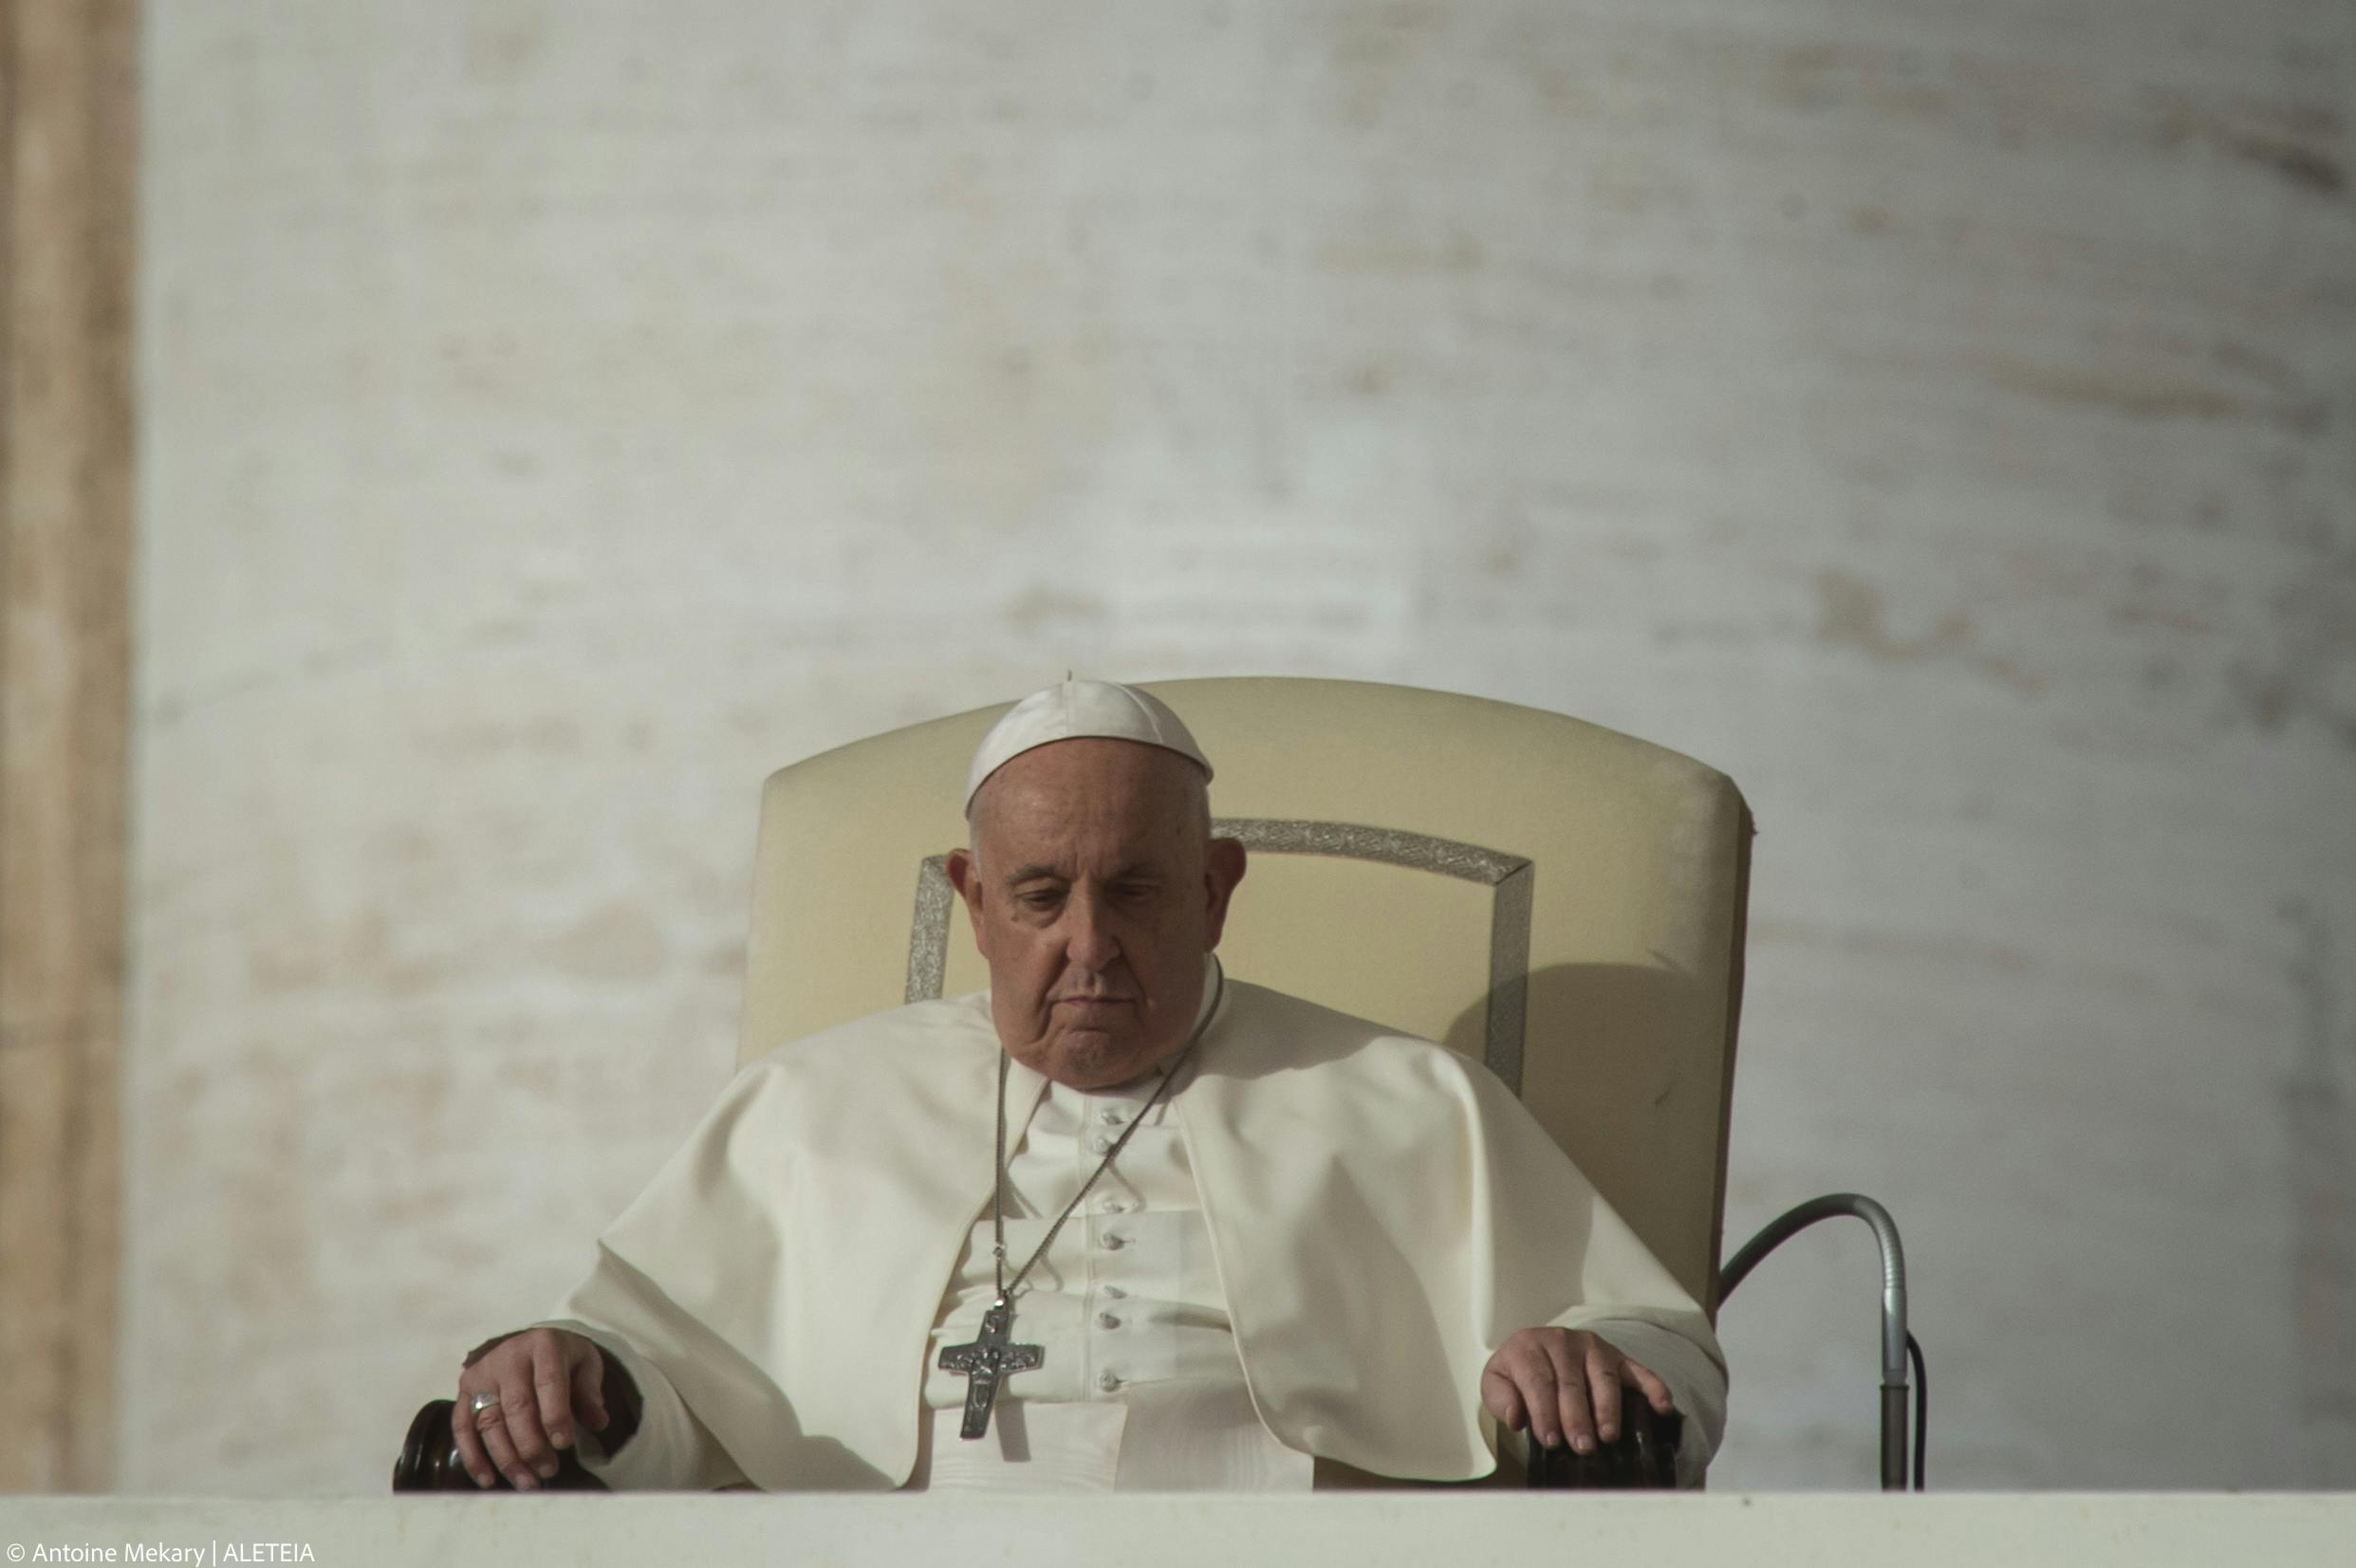 Today the ugliest danger is gender ideology, says Pope